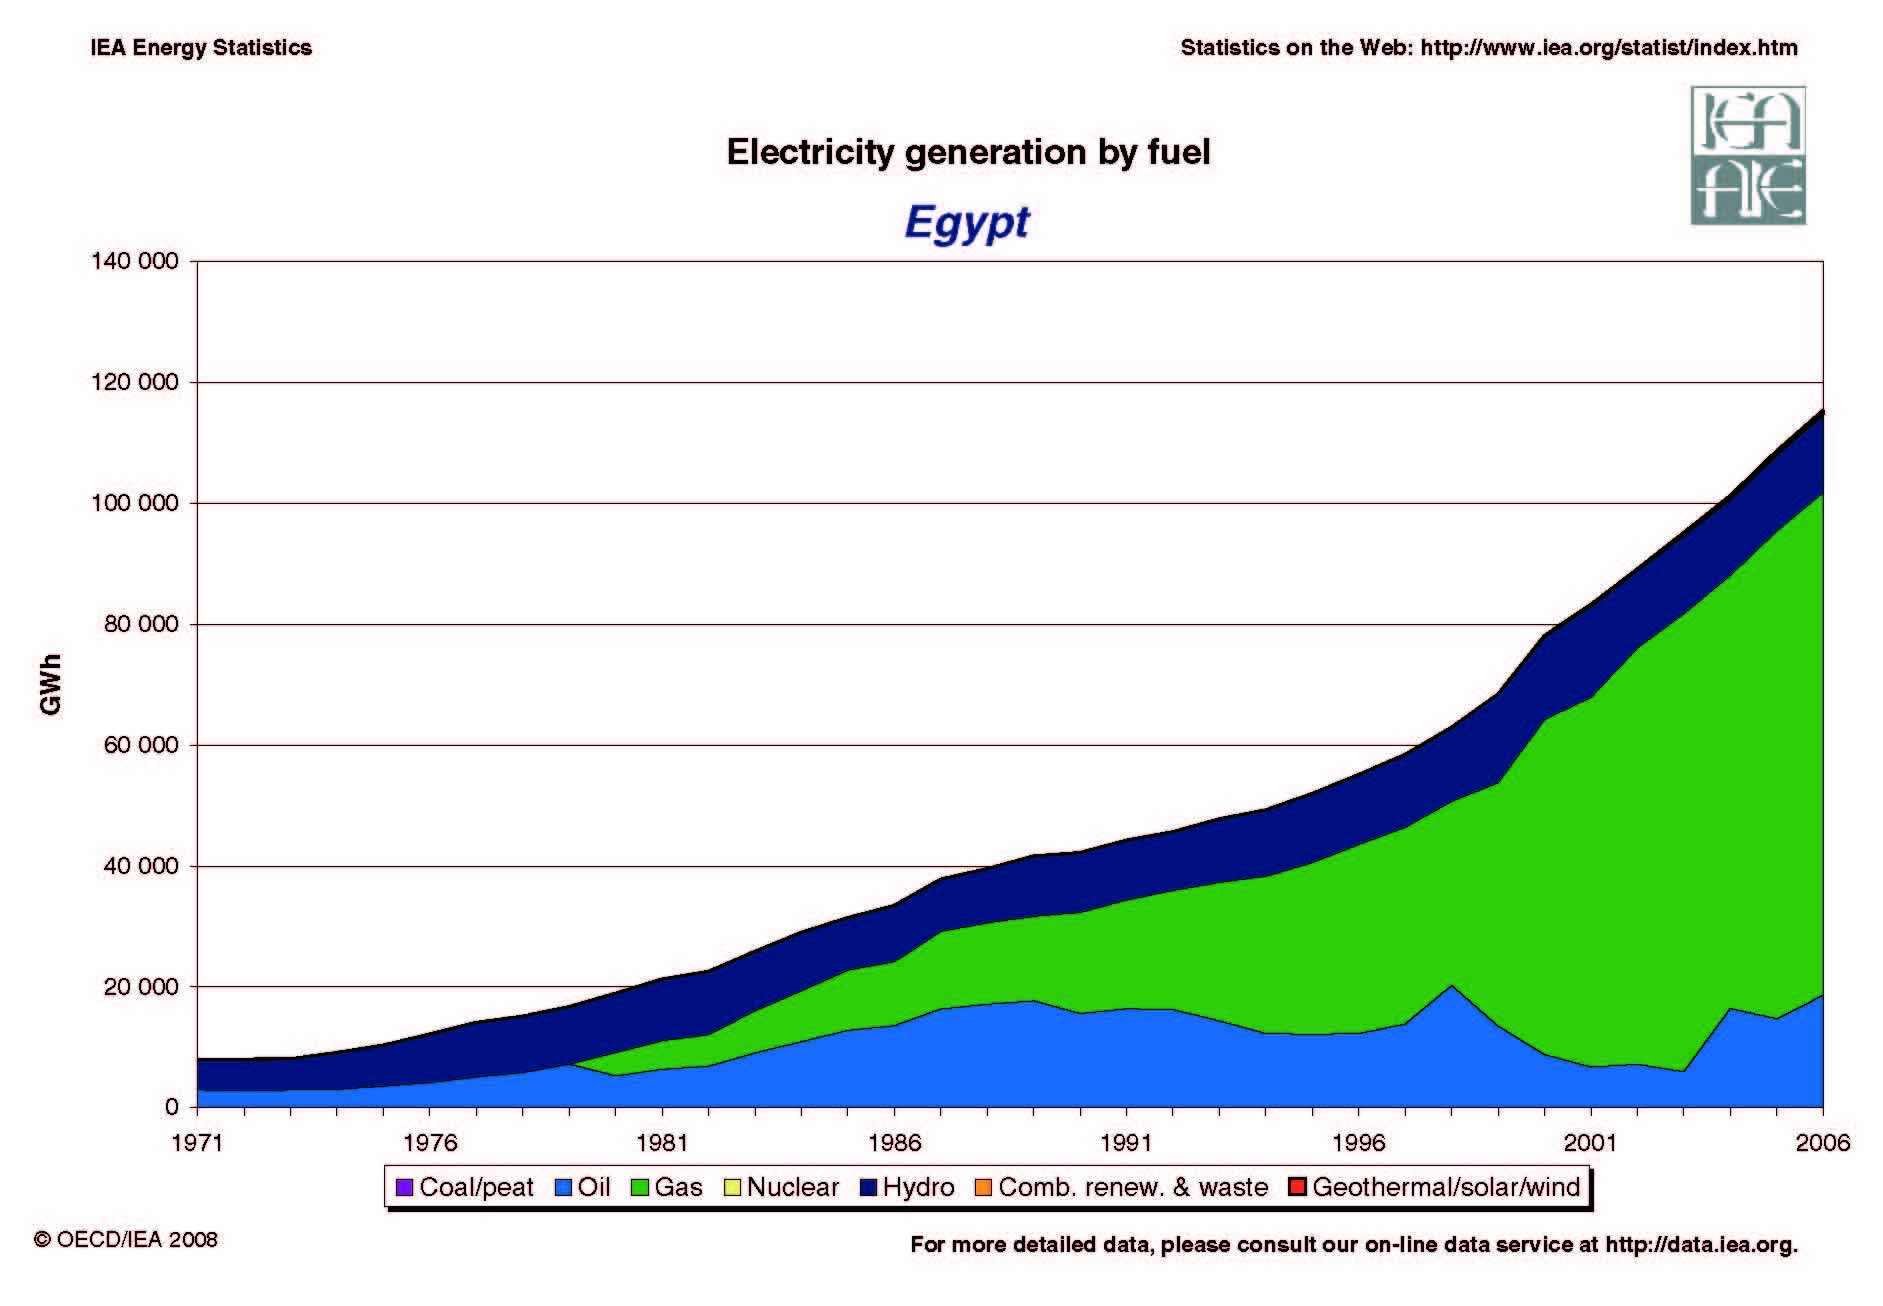 Egypt Evolution of Electricity Generation by Fuel 1971 - 2006